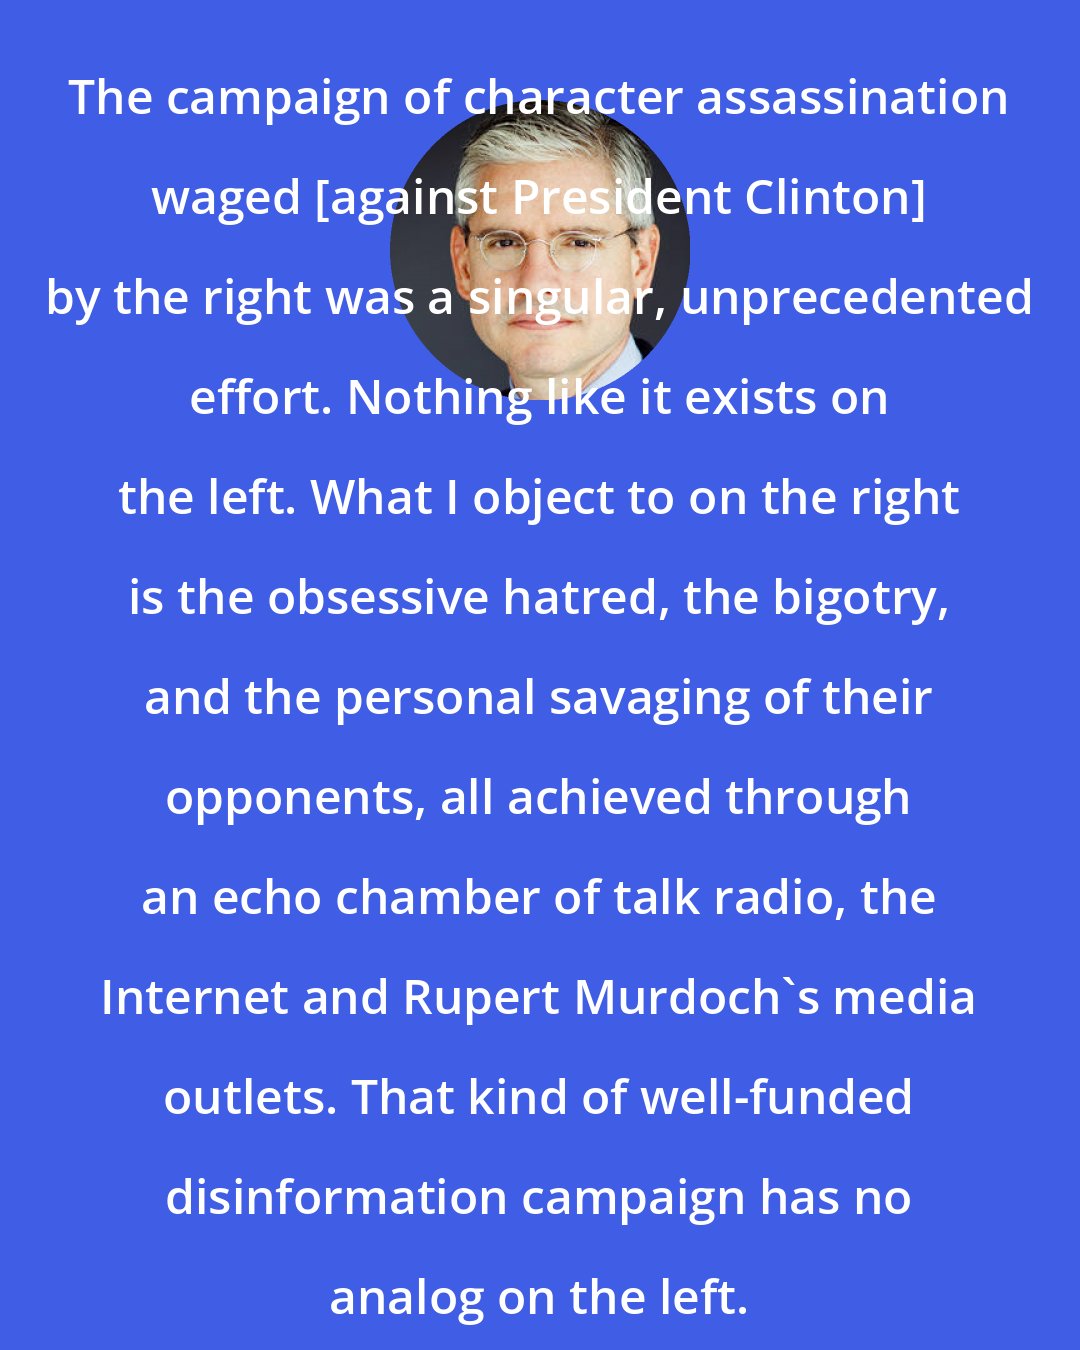 David Brock: The campaign of character assassination waged [against President Clinton] by the right was a singular, unprecedented effort. Nothing like it exists on the left. What I object to on the right is the obsessive hatred, the bigotry, and the personal savaging of their opponents, all achieved through an echo chamber of talk radio, the Internet and Rupert Murdoch's media outlets. That kind of well-funded disinformation campaign has no analog on the left.